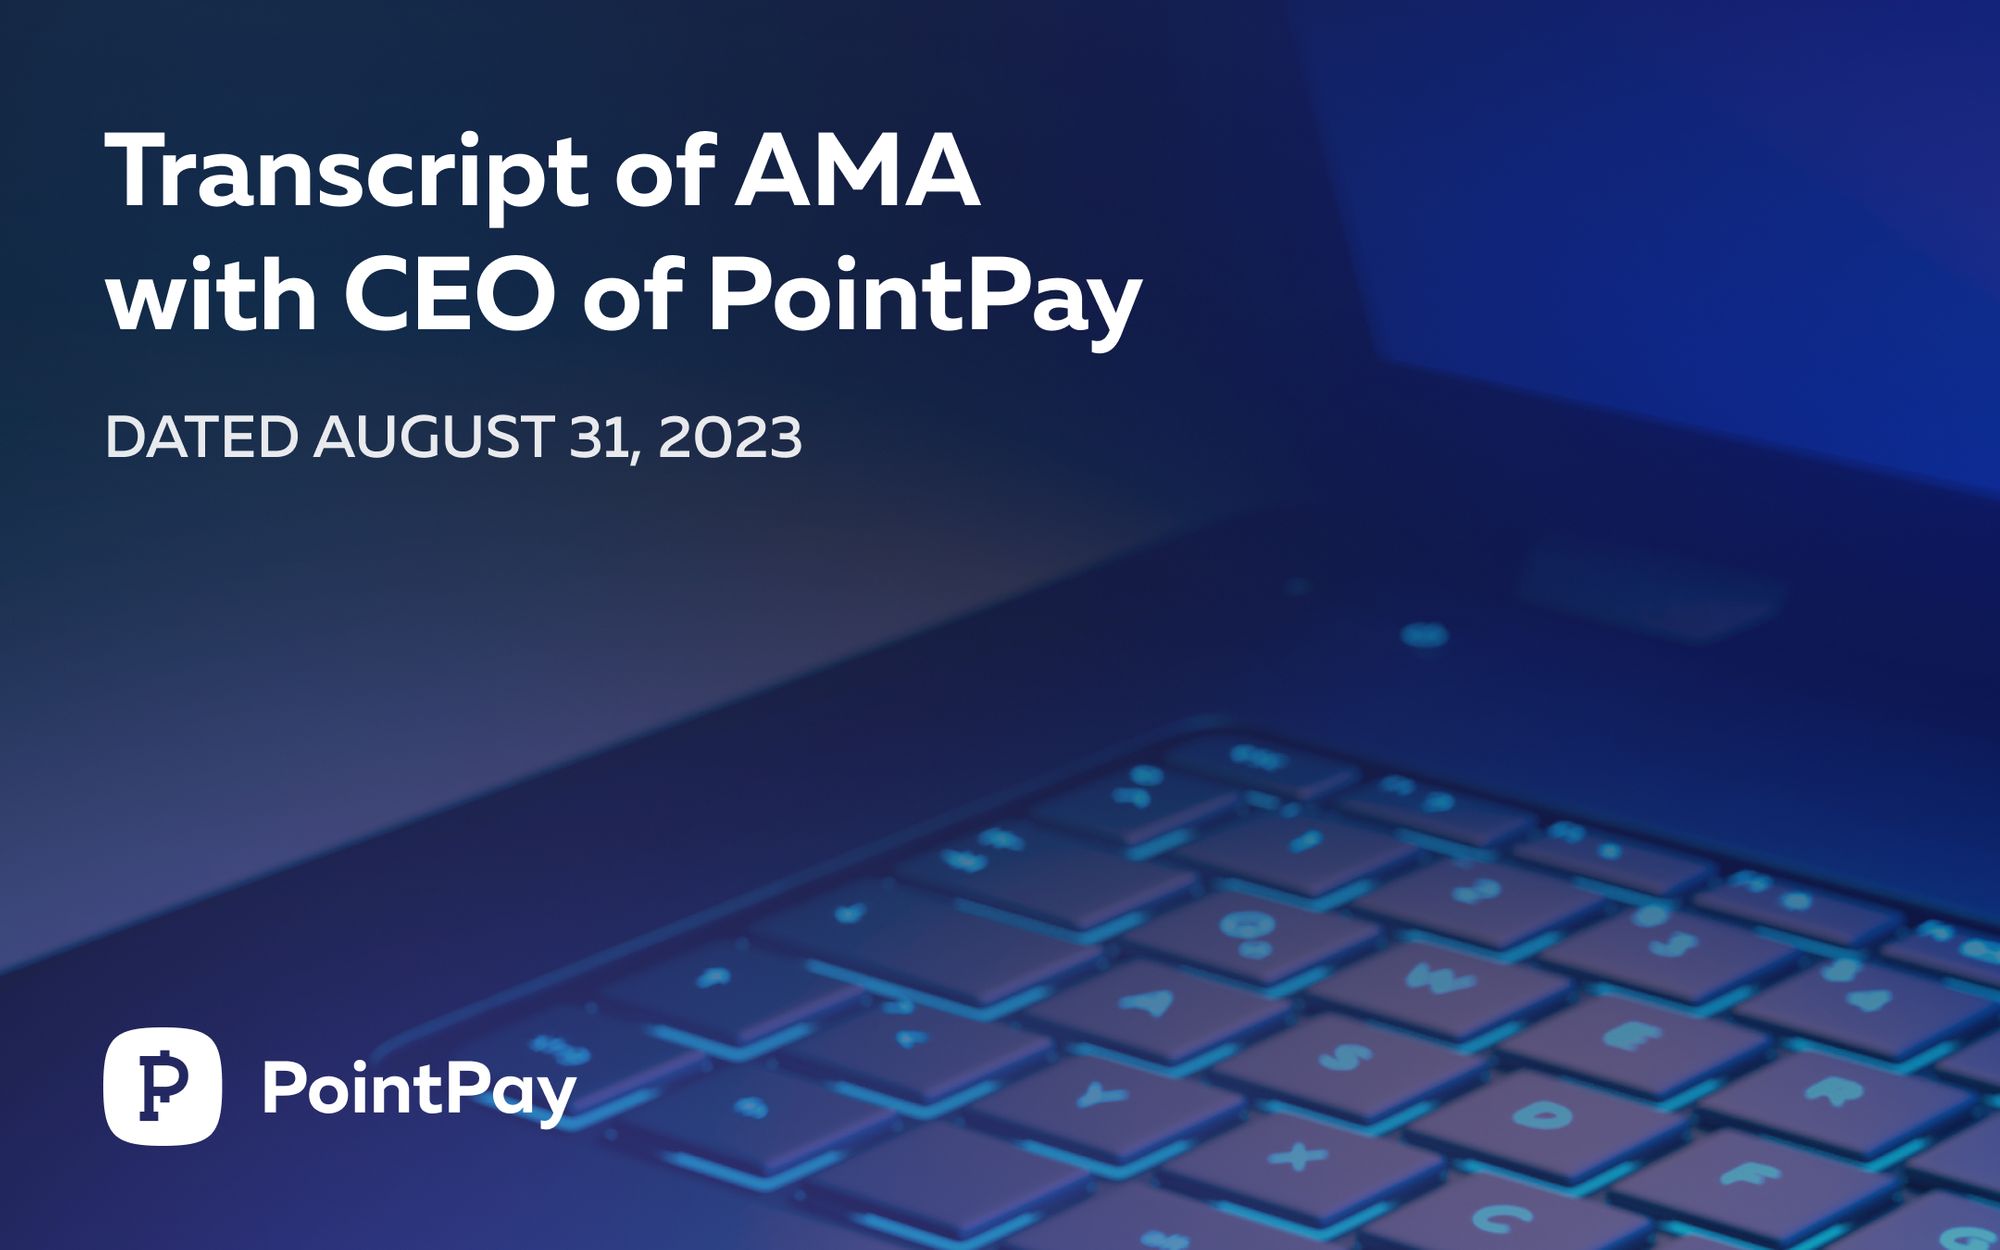 Transcript of AMA with CEO of PointPay – Vladimir Kardapoltsev, 31 August 2023